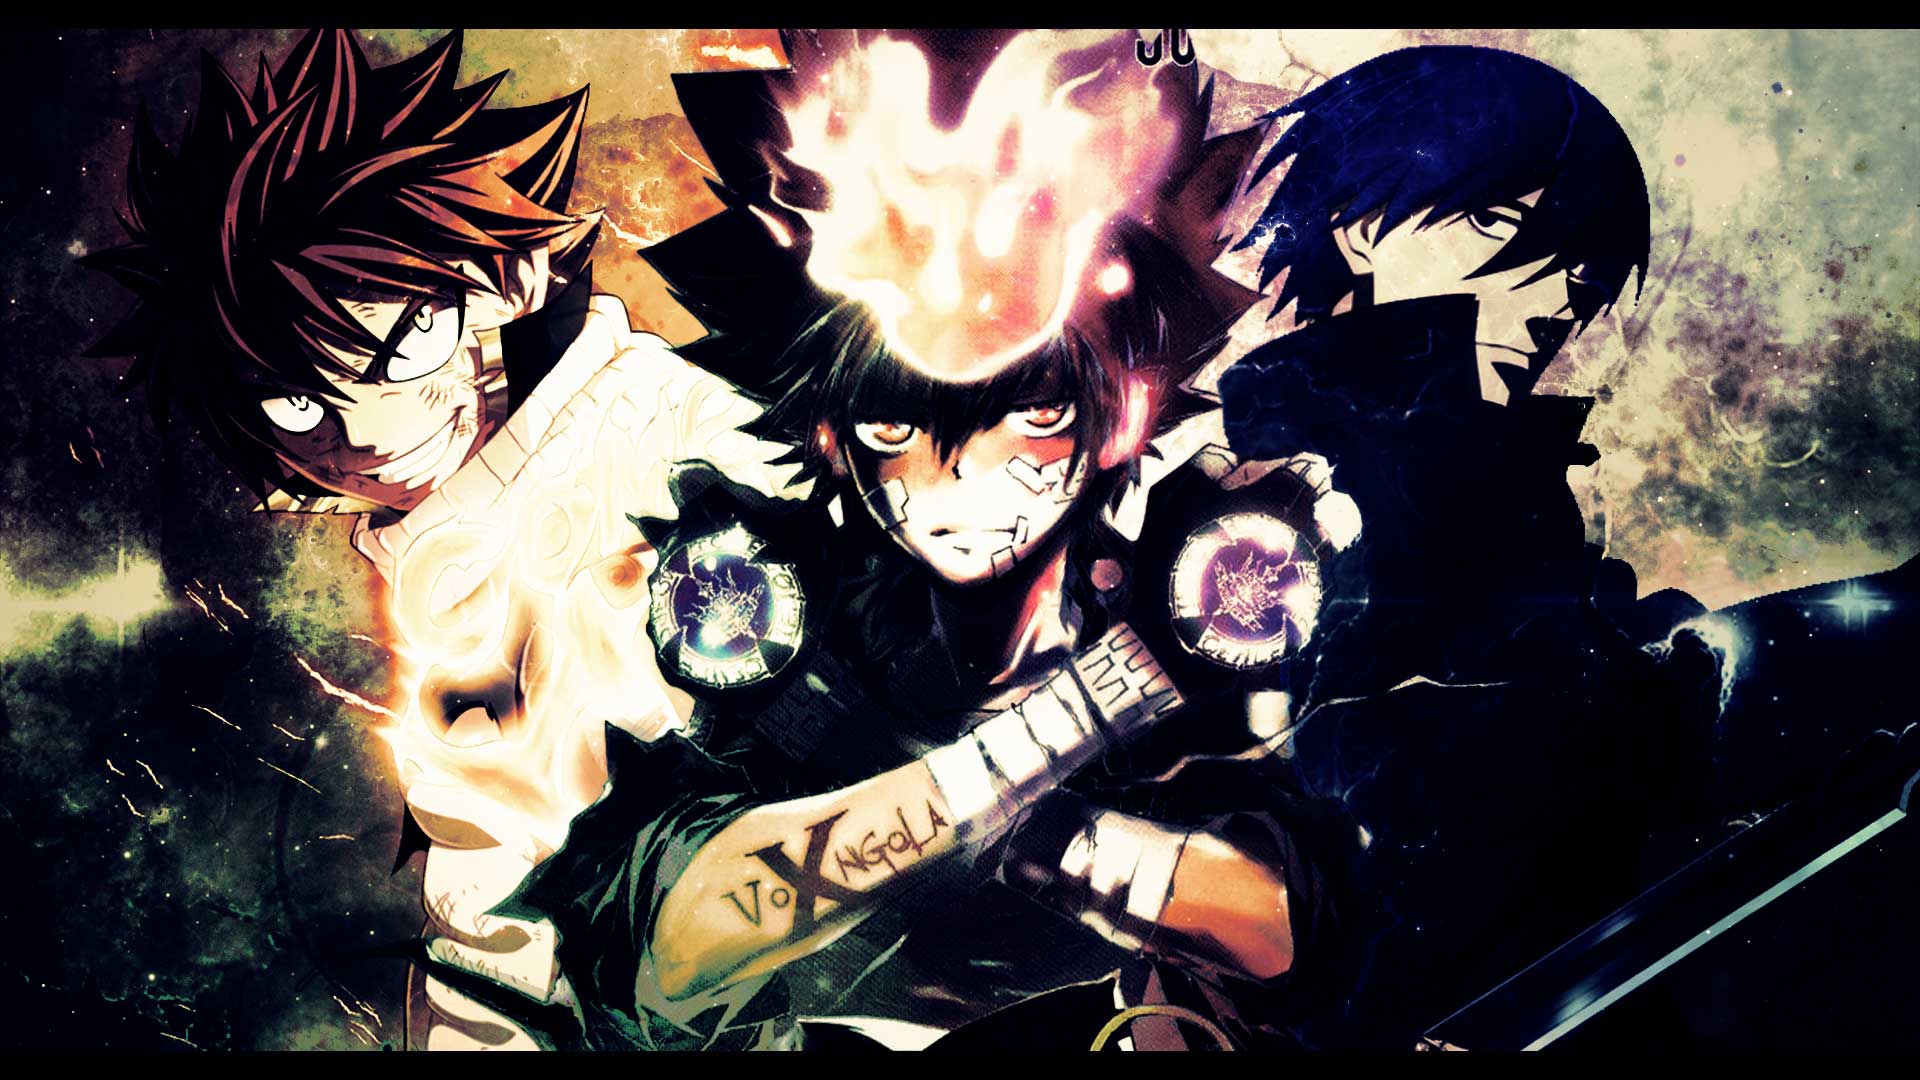 1500+ Anime Fairy Tail HD Wallpapers and Backgrounds